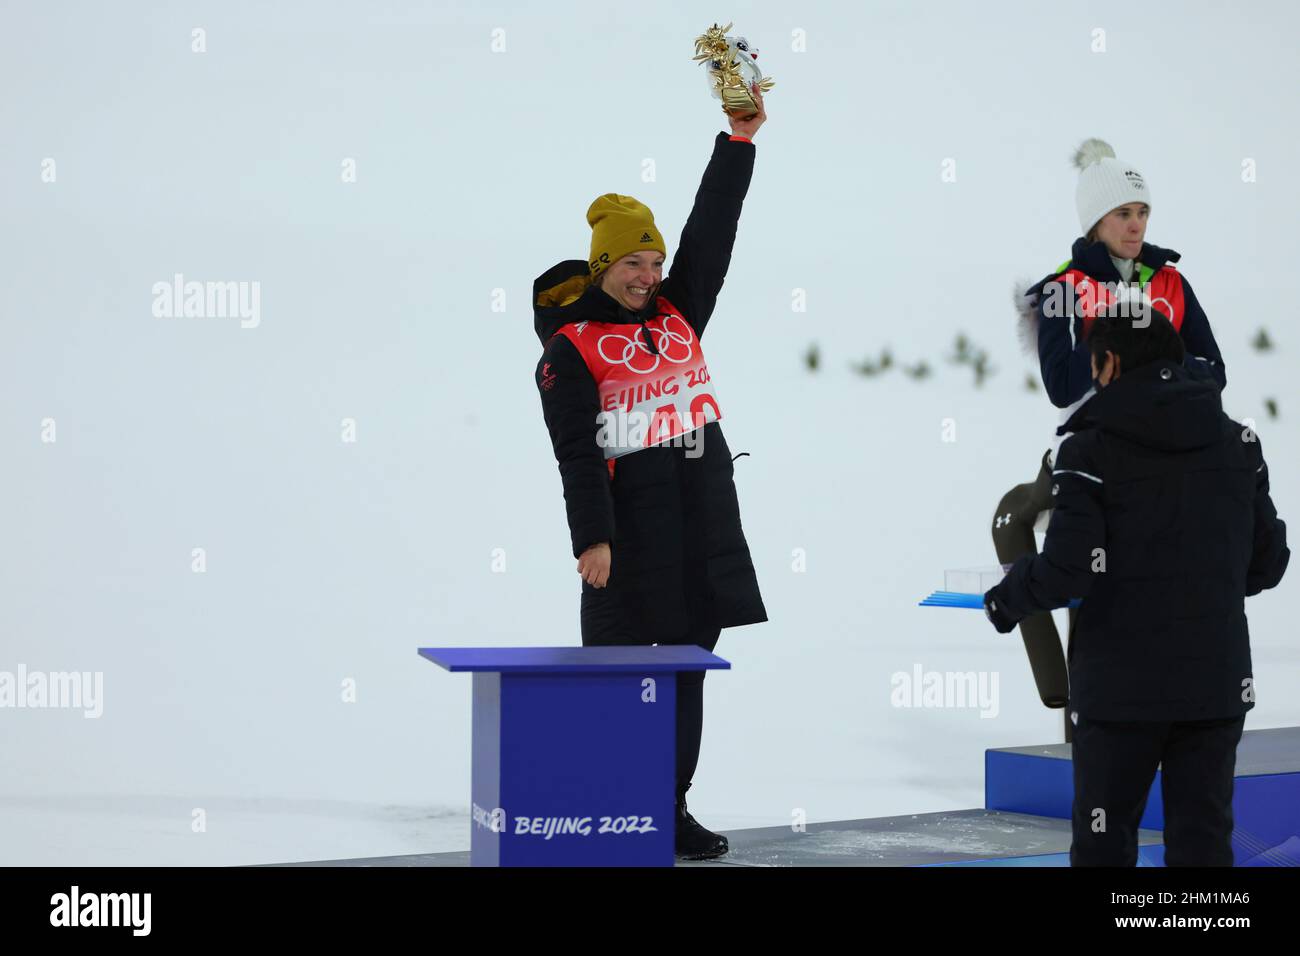 Katharina Althaus (GER), jubilation, joy, enthusiasm, FEBRUARY 5, 2022 - Ski Jumping : Women's Individual Normal Hill Flower Ceremony during the Beijing 2022 Olympic Winter Games at National Ski Jumping Center in Zhangjiakou, Hebei, China.24th Beijing Winter Olympics 2022 in Beijing from 04.02.-20.02.2022. NO SALES OUTSIDE GERMANY ! Photo: YUTAKA/AFLO via Sven Simon Photo Agency GmbH & Co. Press Photo KG # Princess-Luise-Str. 41 # 45479 M uelheim/R uhr # Tel. 0208/9413250 # Fax. 0208/9413260 # Account 244 293 433 # GLSB arrival # Account 4030 025 100 # BLZ 430 609 67 # e-mail: svensimon@t-onli Stock Photo